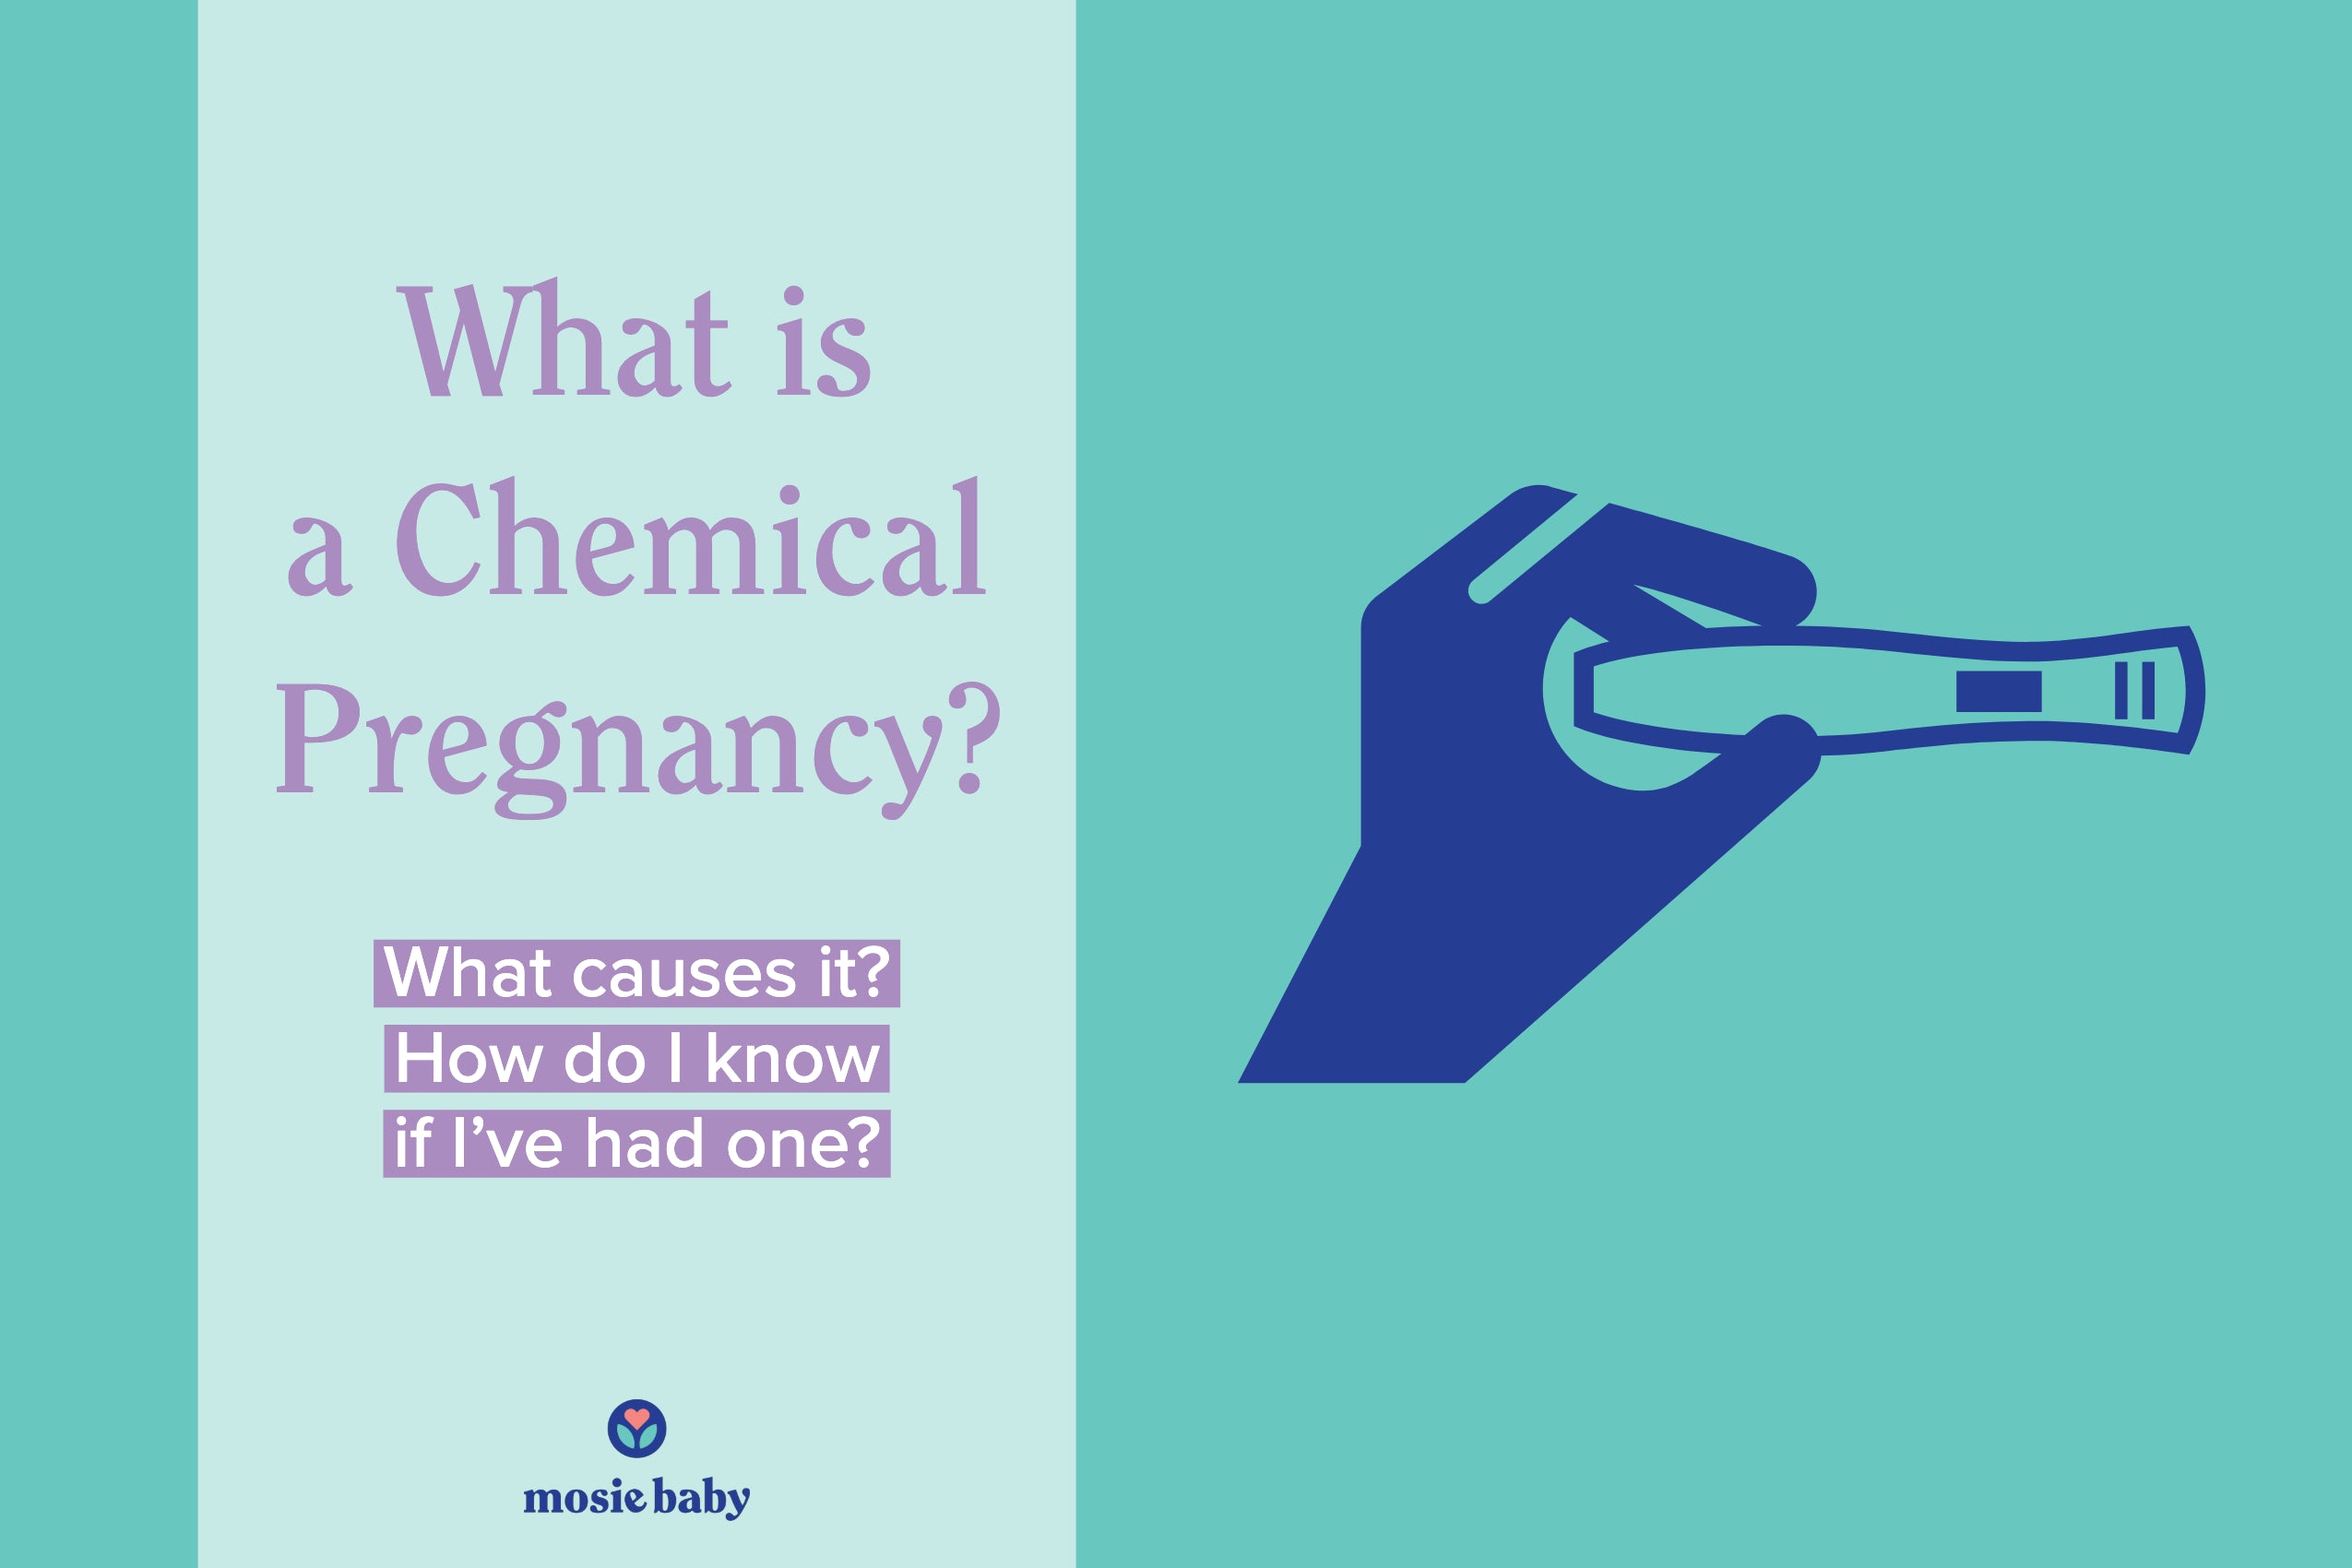 graphic reading "what is a chemical pregnancy? what causes it?"